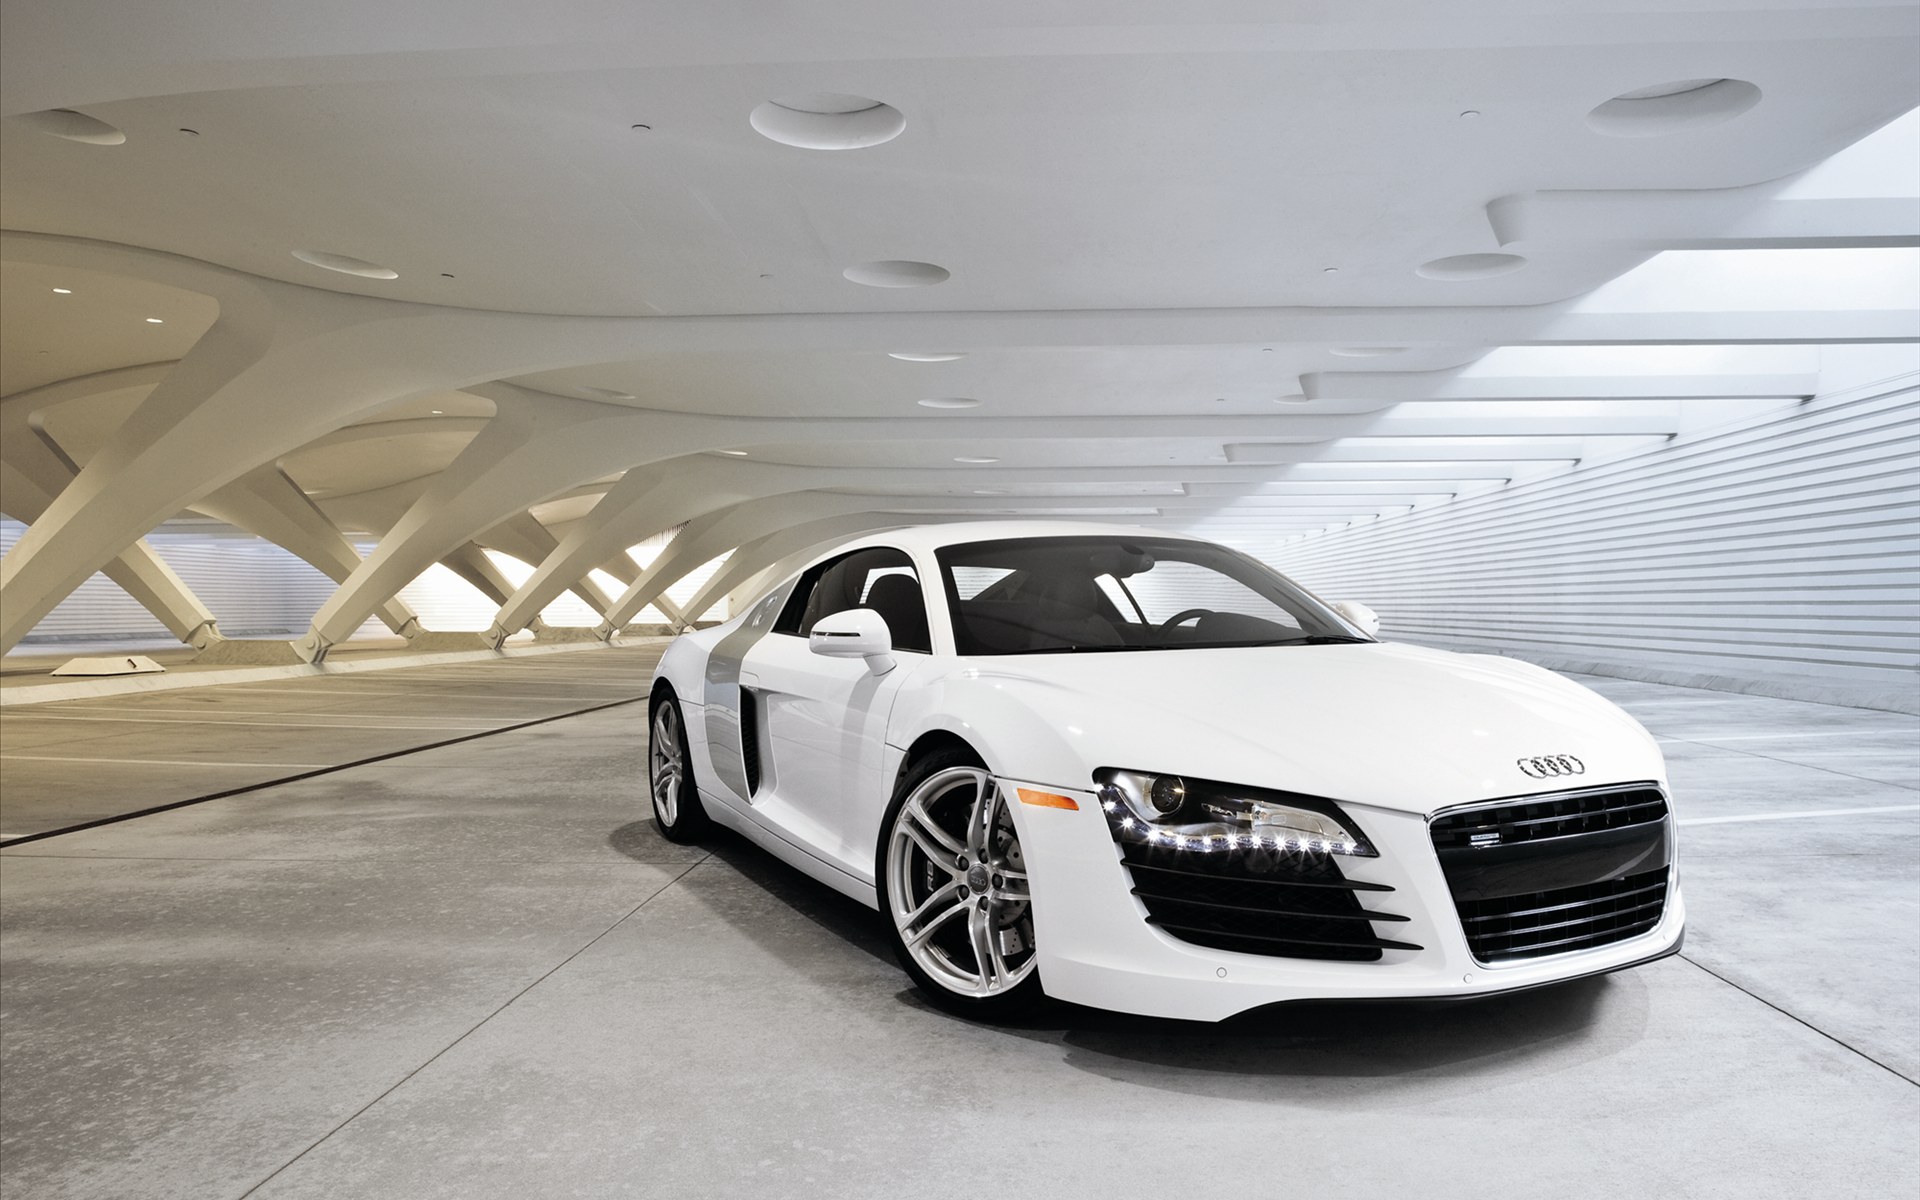 Free Wallpaper Of The Top Cars: A White Sports Car Audi R8  Free Wallpaper World